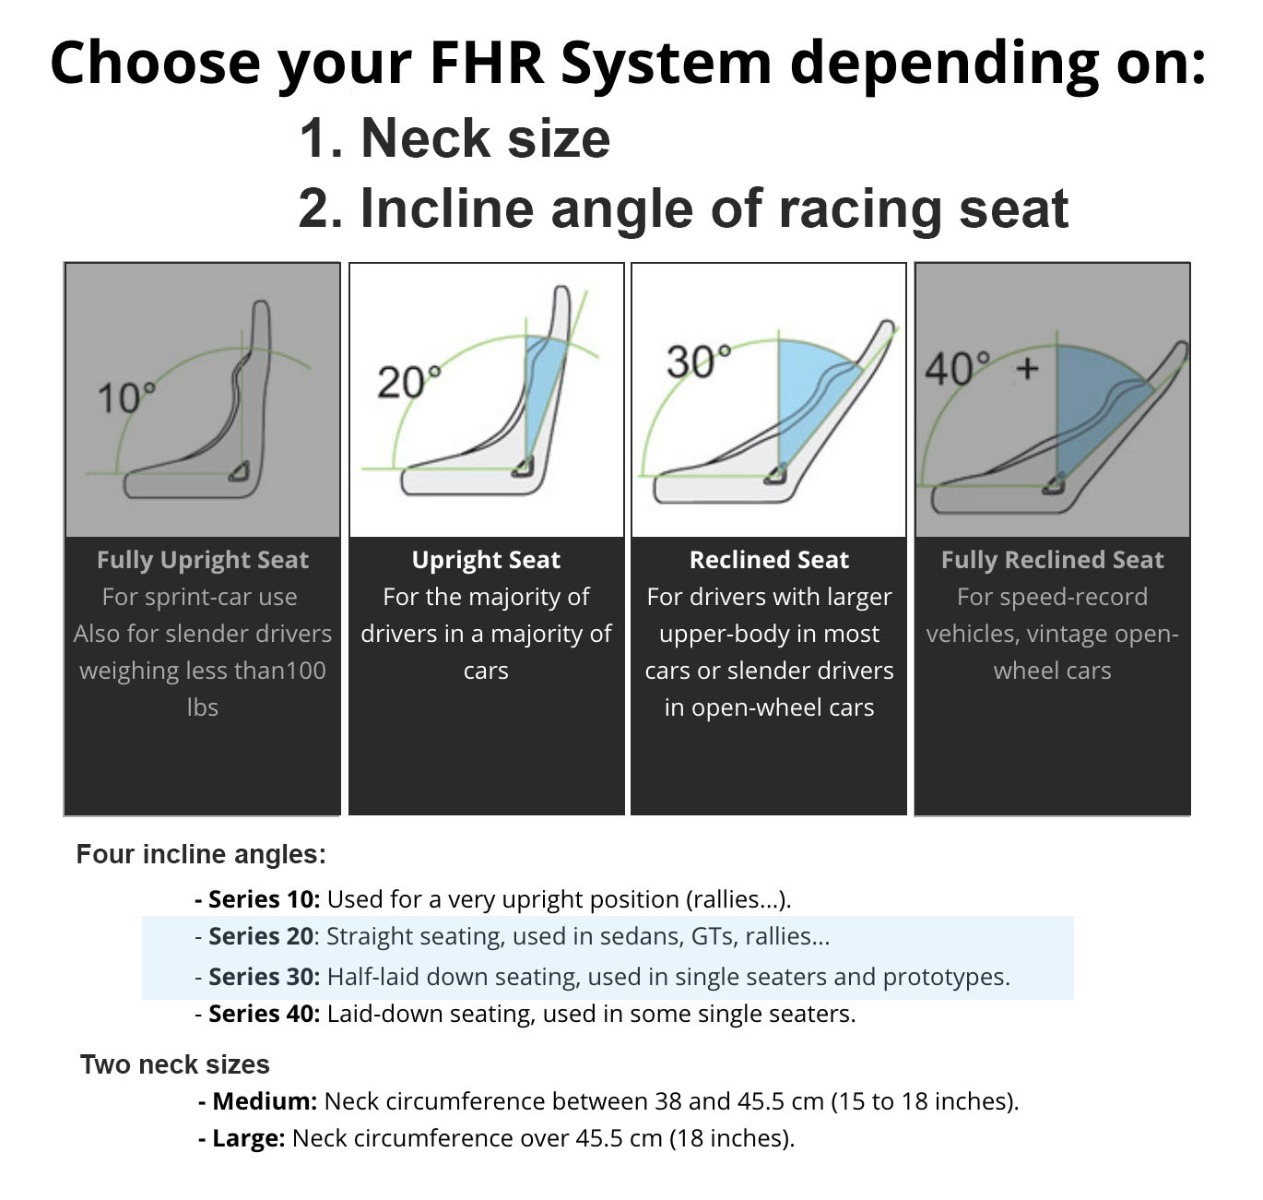 Hans Neck Brace Sizing Charts. Choose your FHR (Frontal Head Restraints) System depending on:
1. Neck size
2. Incline angle of racing seat